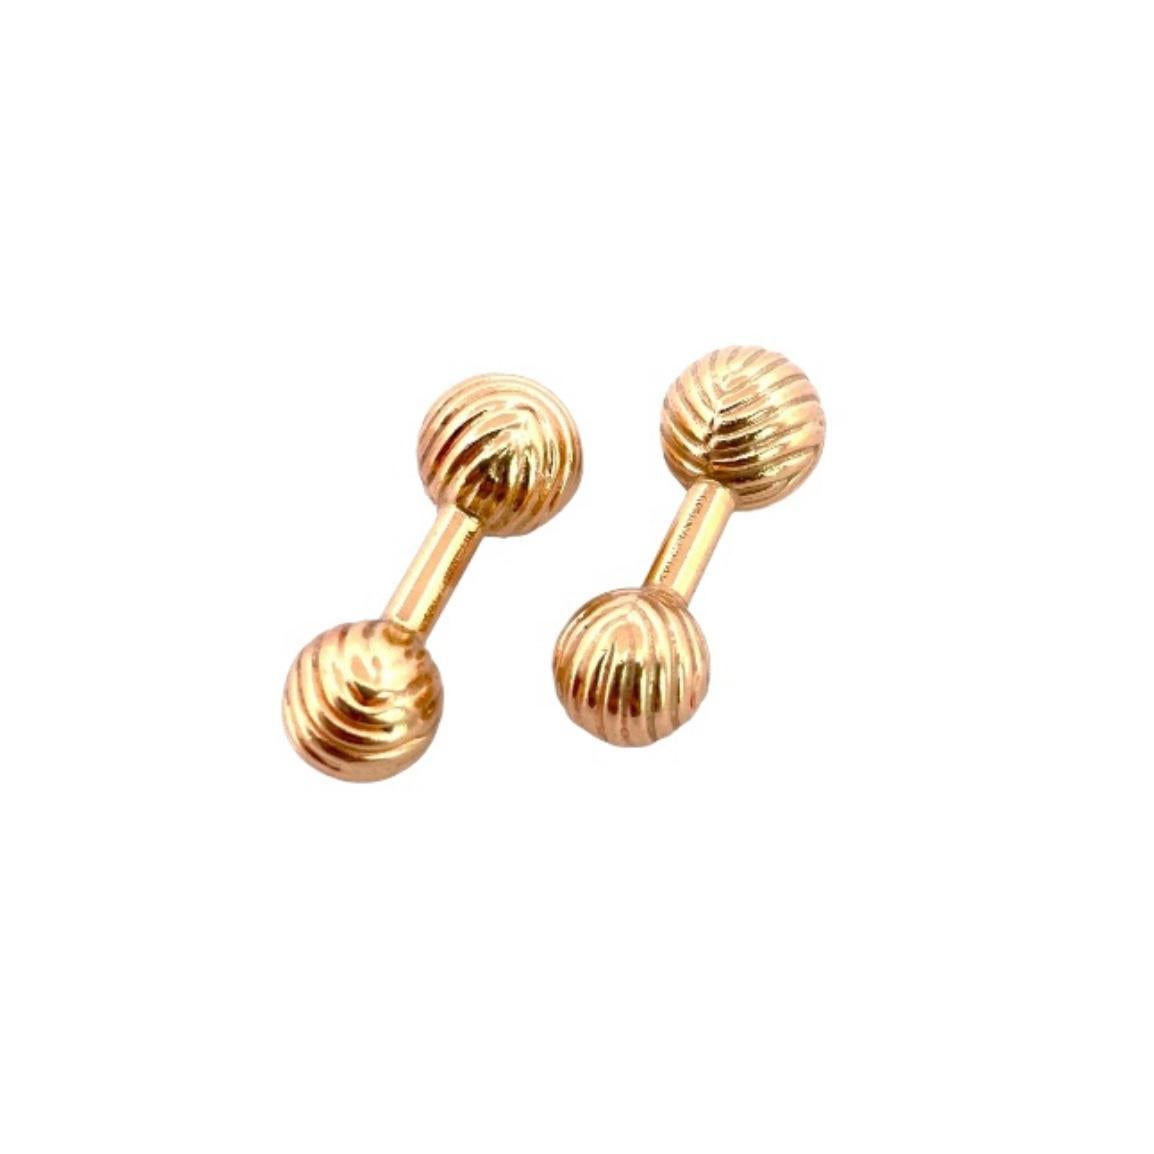 Rare Tiffany & Co. 14K Yellow Gold Knots Cufflinks Set In New Condition For Sale In New York, NY